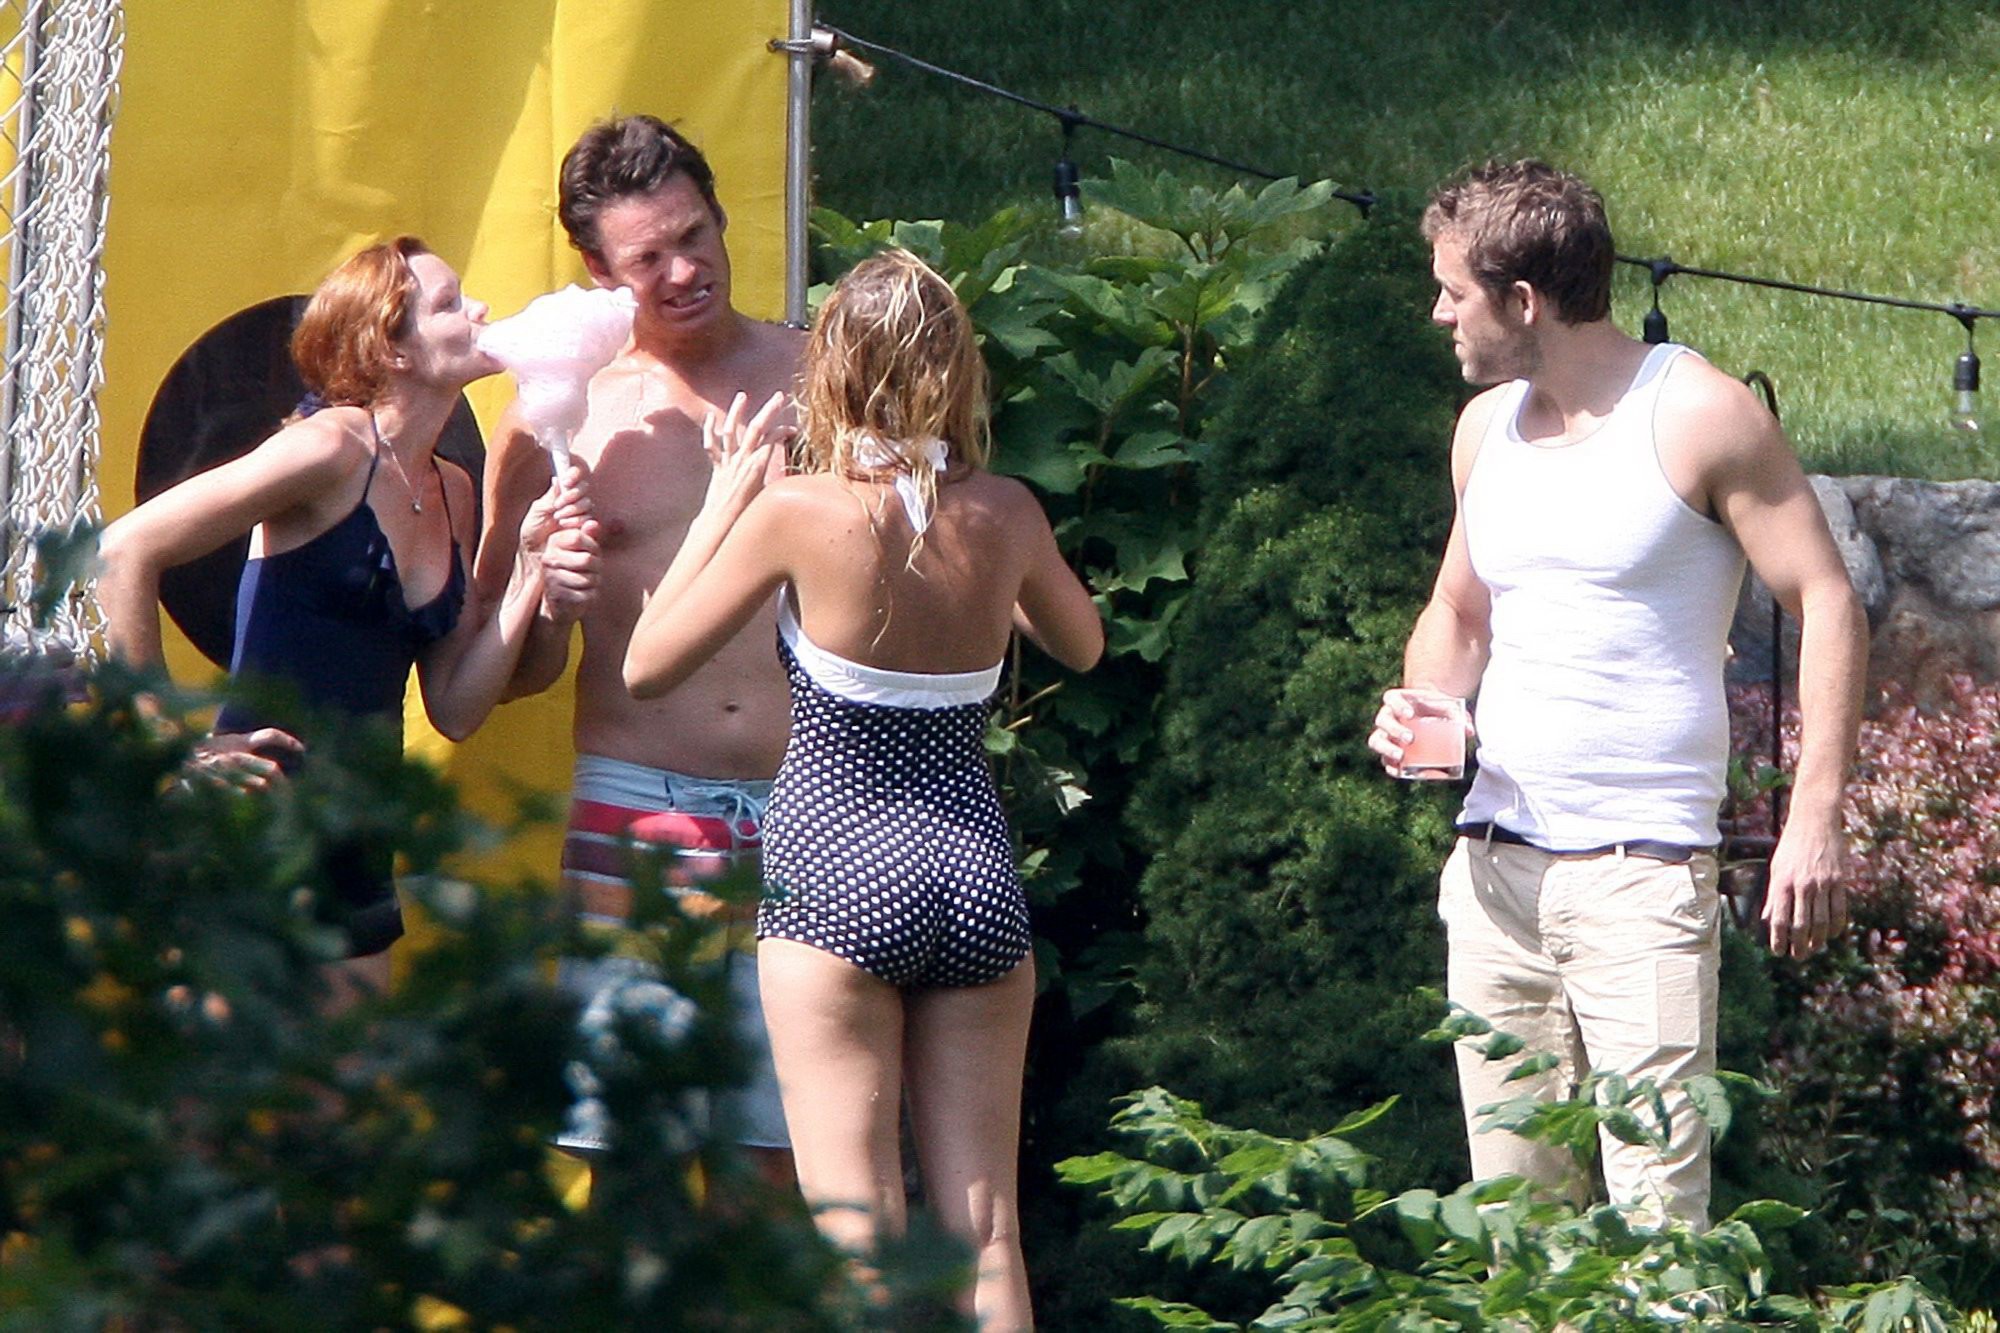 Blake Lively showing her ass in polka dot monokini at the pool party in NYC #75257914